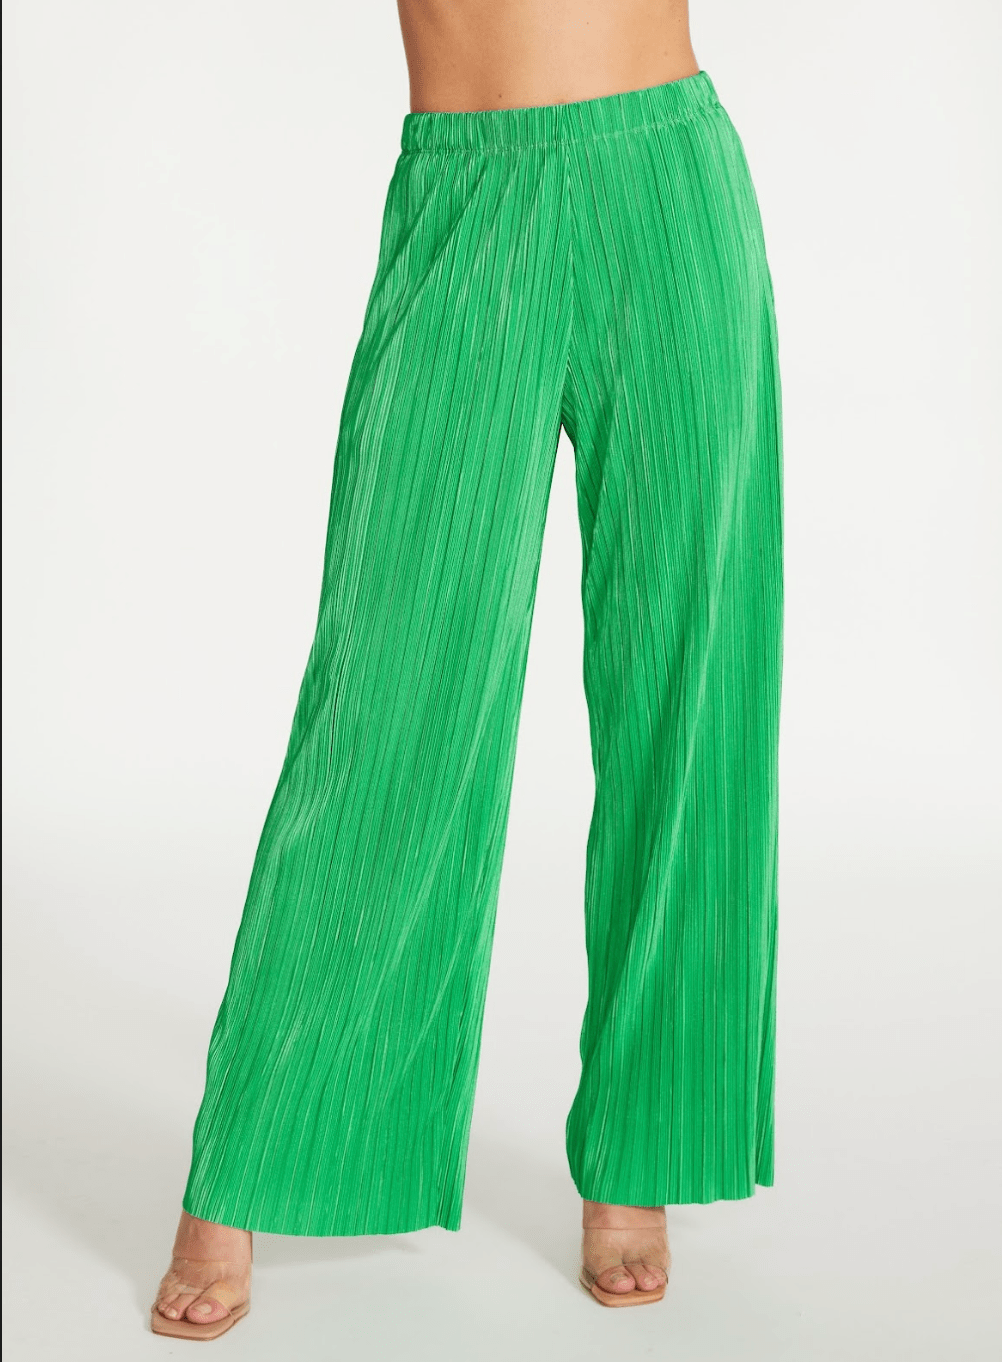 Addy Green Pleated High Rise Pant, Bottoms by Steve Madden | LIT Boutique